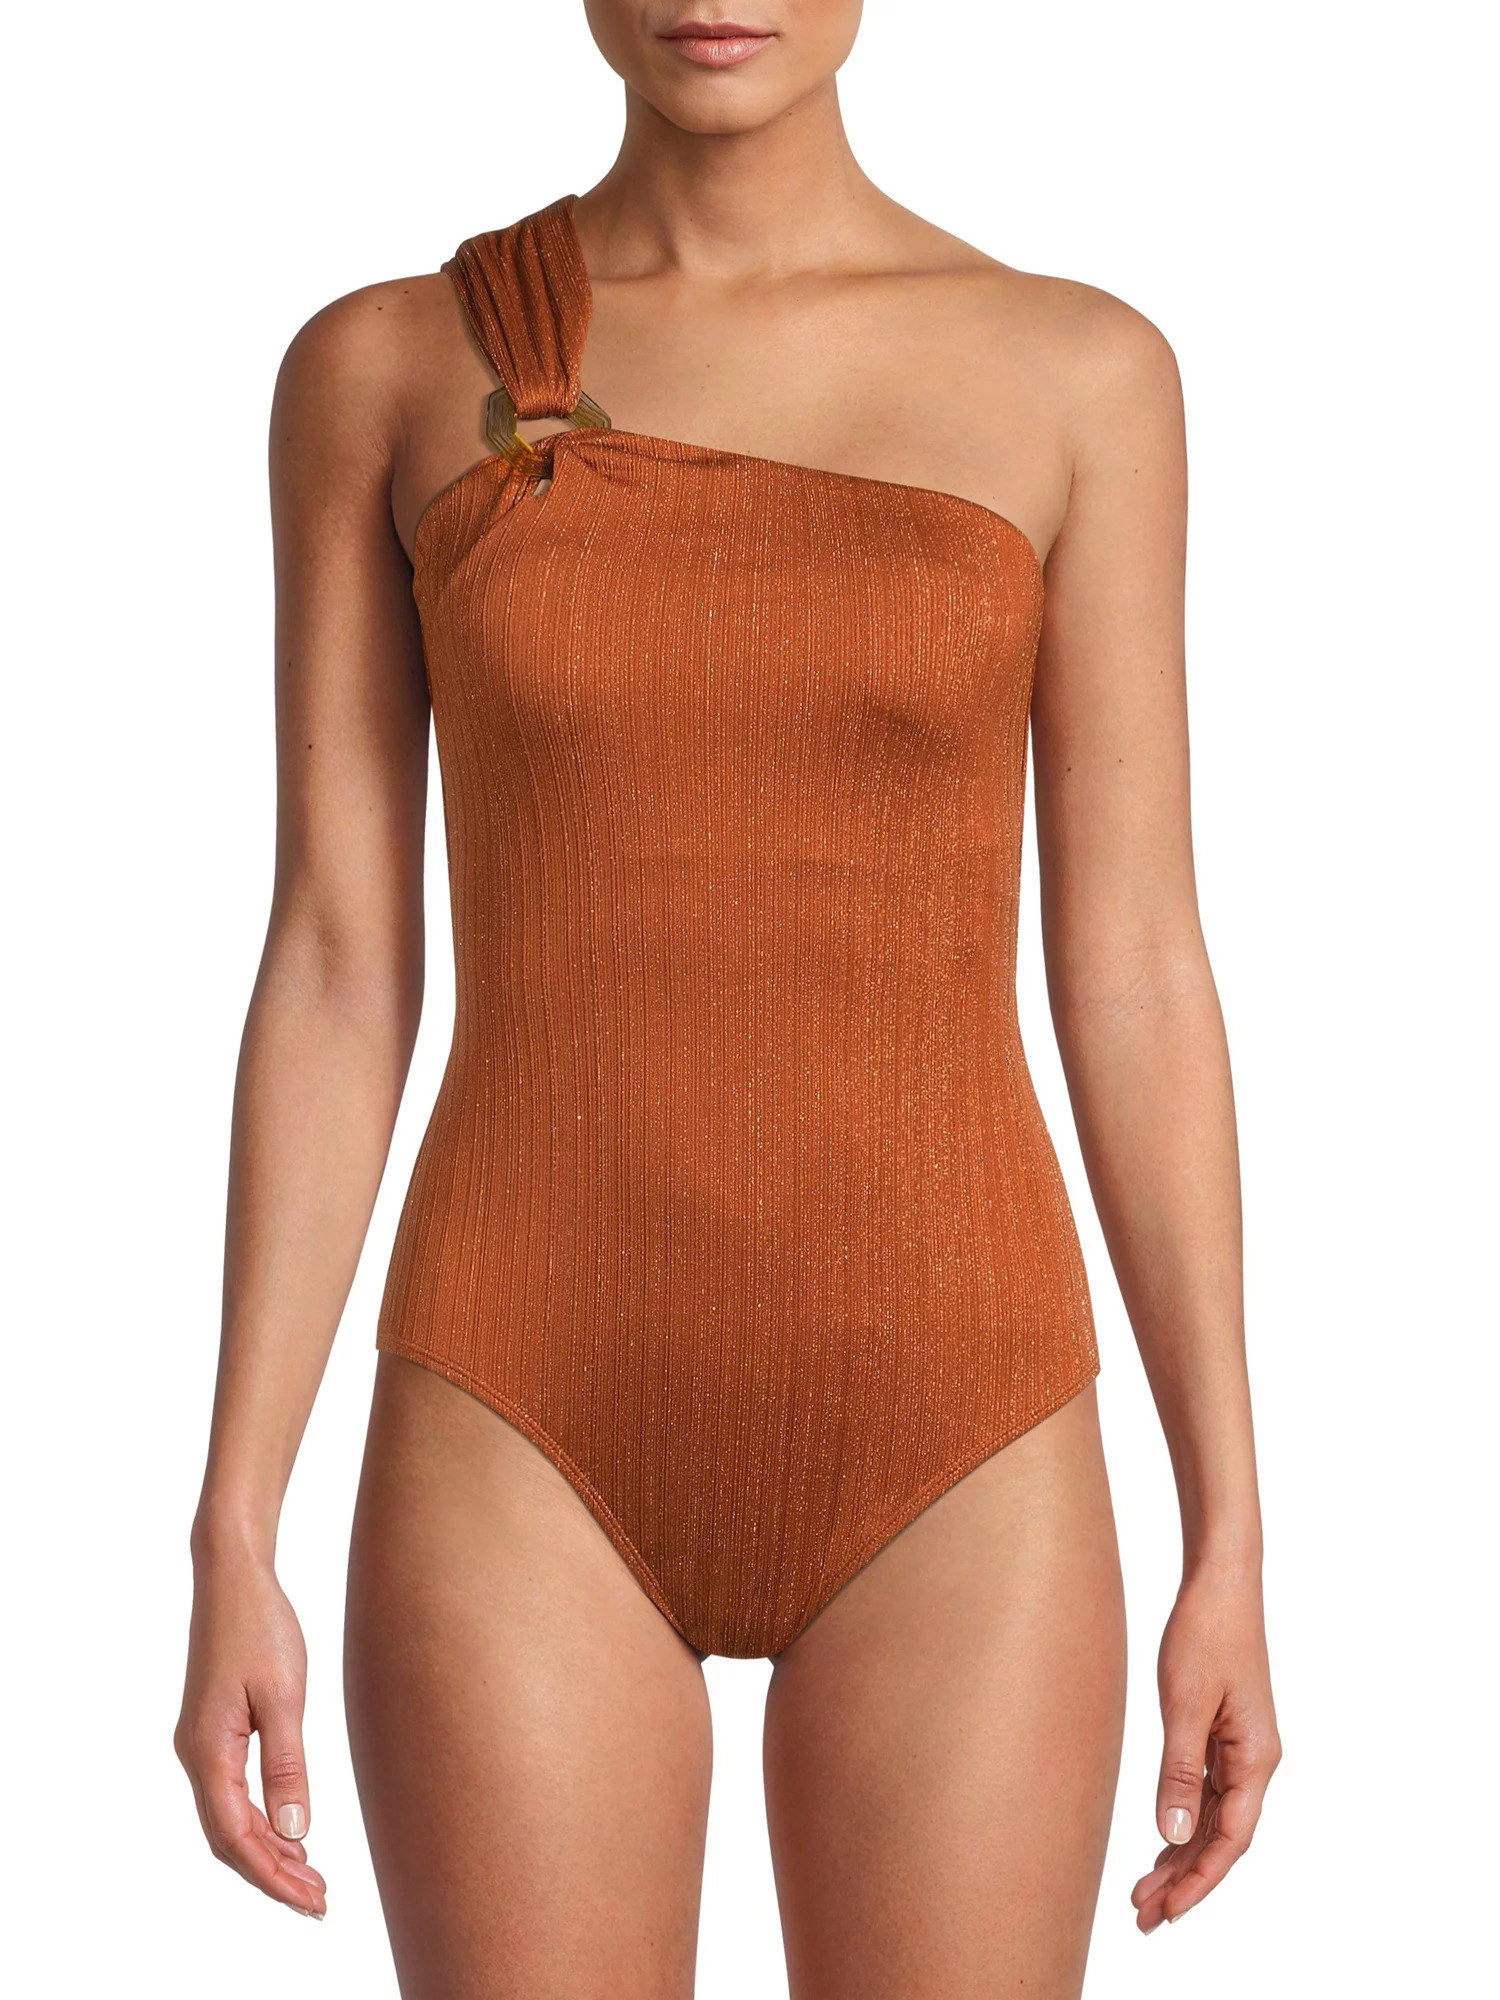 a model wearing the brown swimsuit